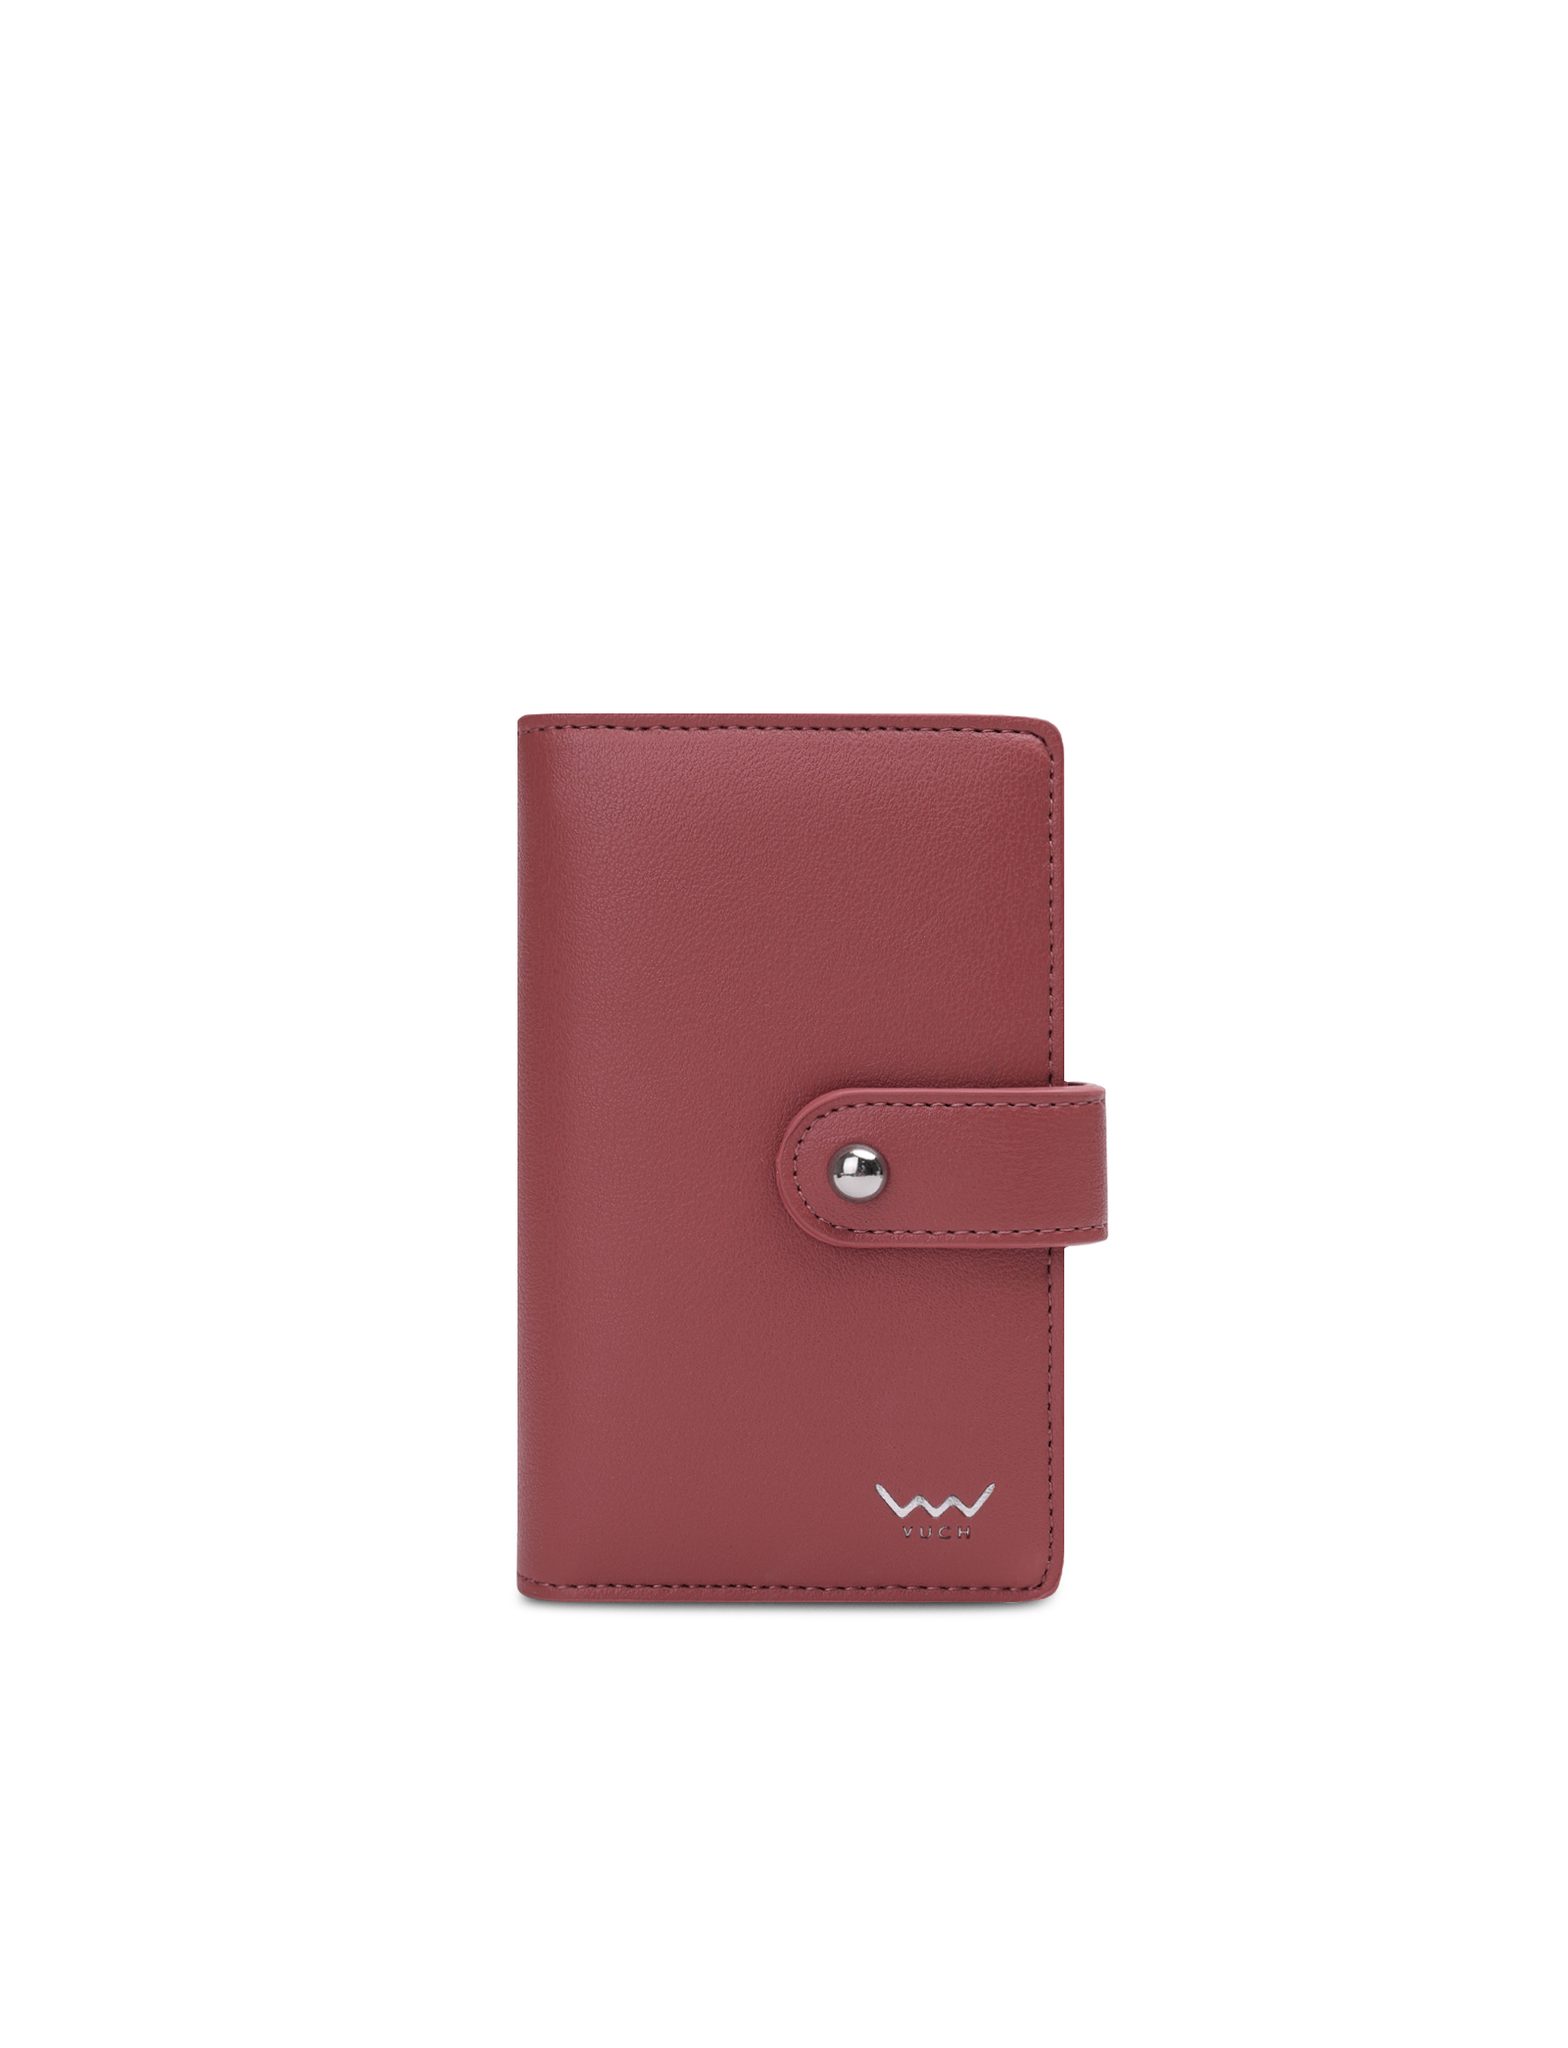 VUCH Maeva Middle Pink Wallet